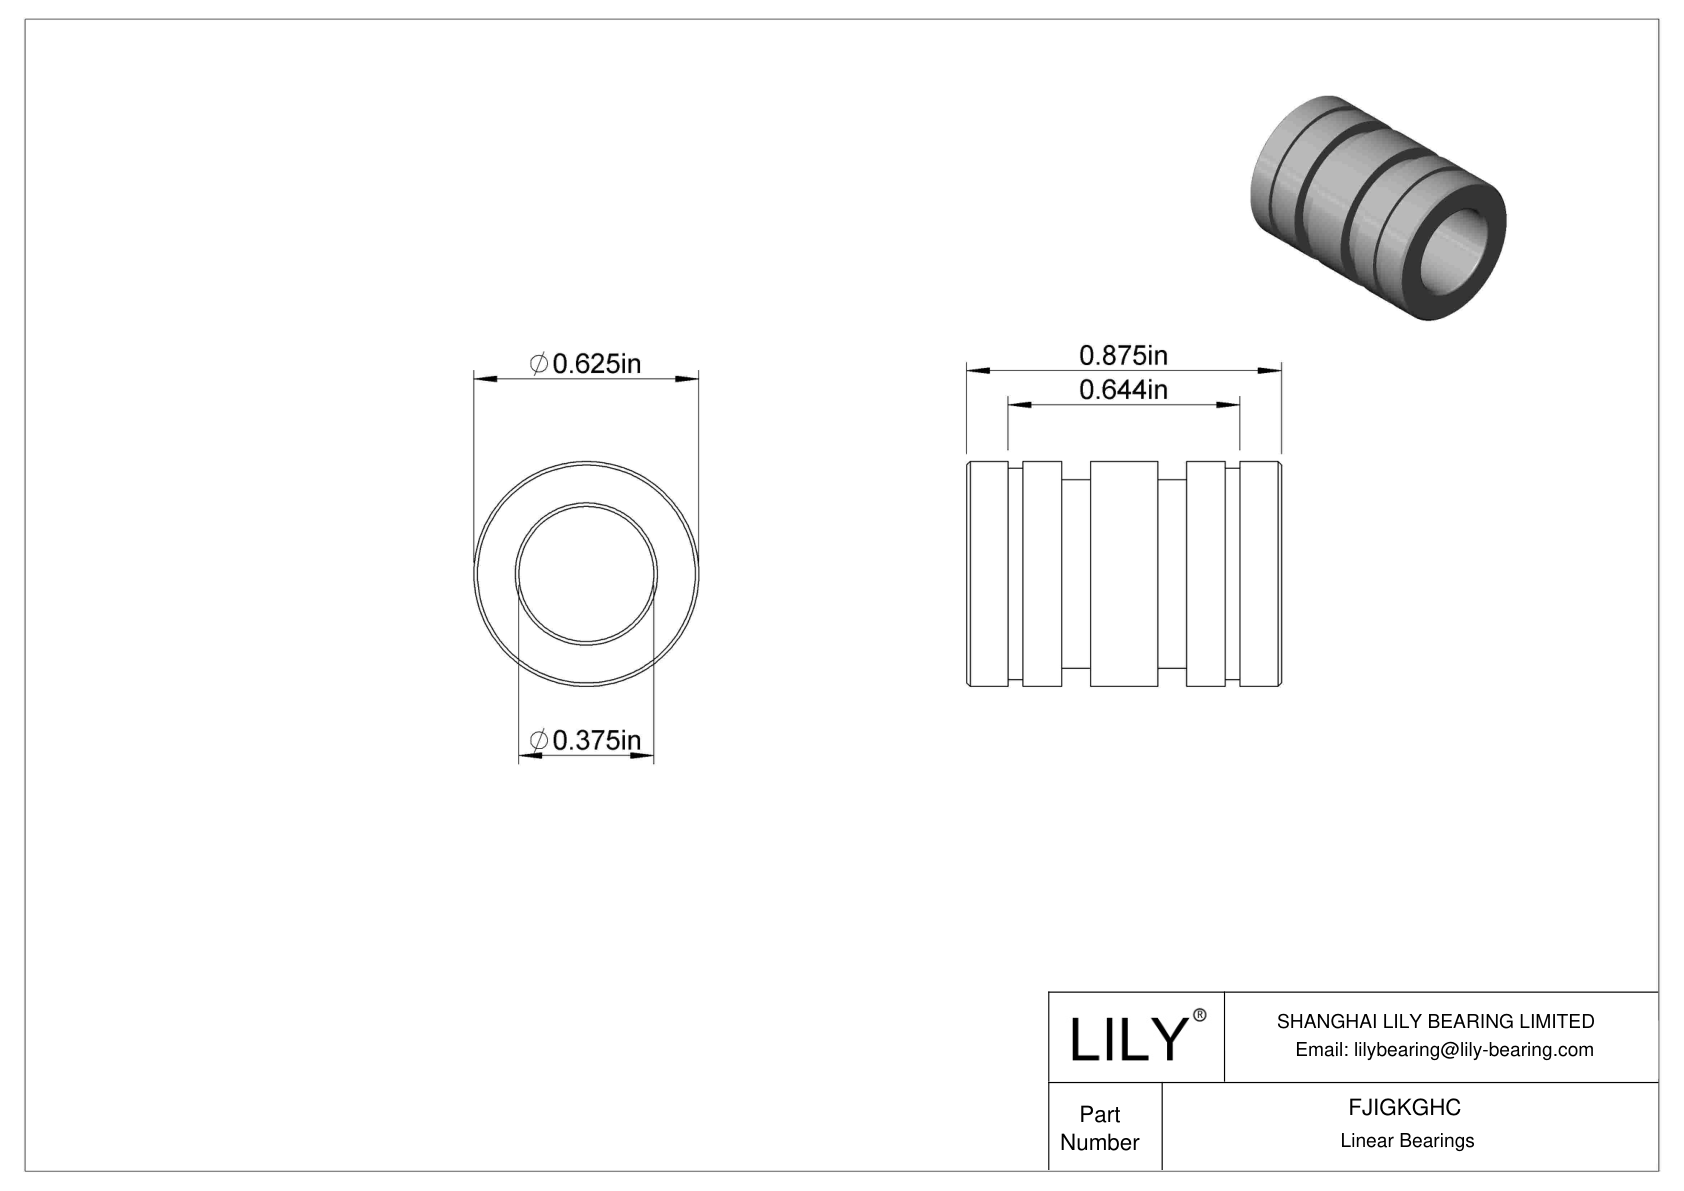 FJIGKGHC Common Linear Sleeve Bearings cad drawing